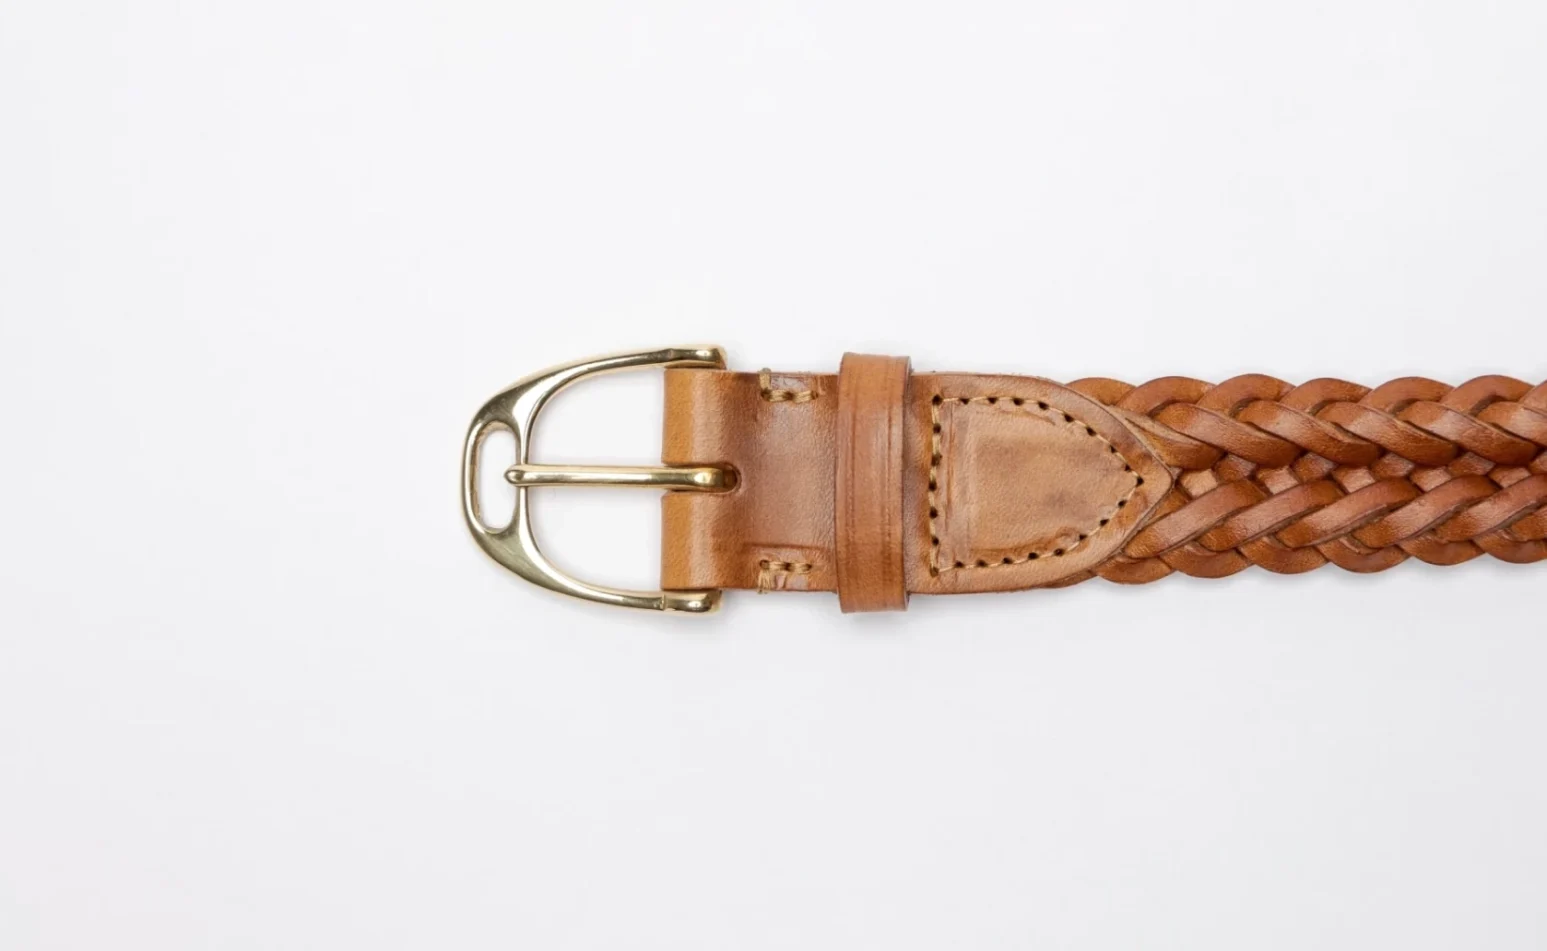 Inverted Plait Belt in Vegetable Tanned Leather in Tan